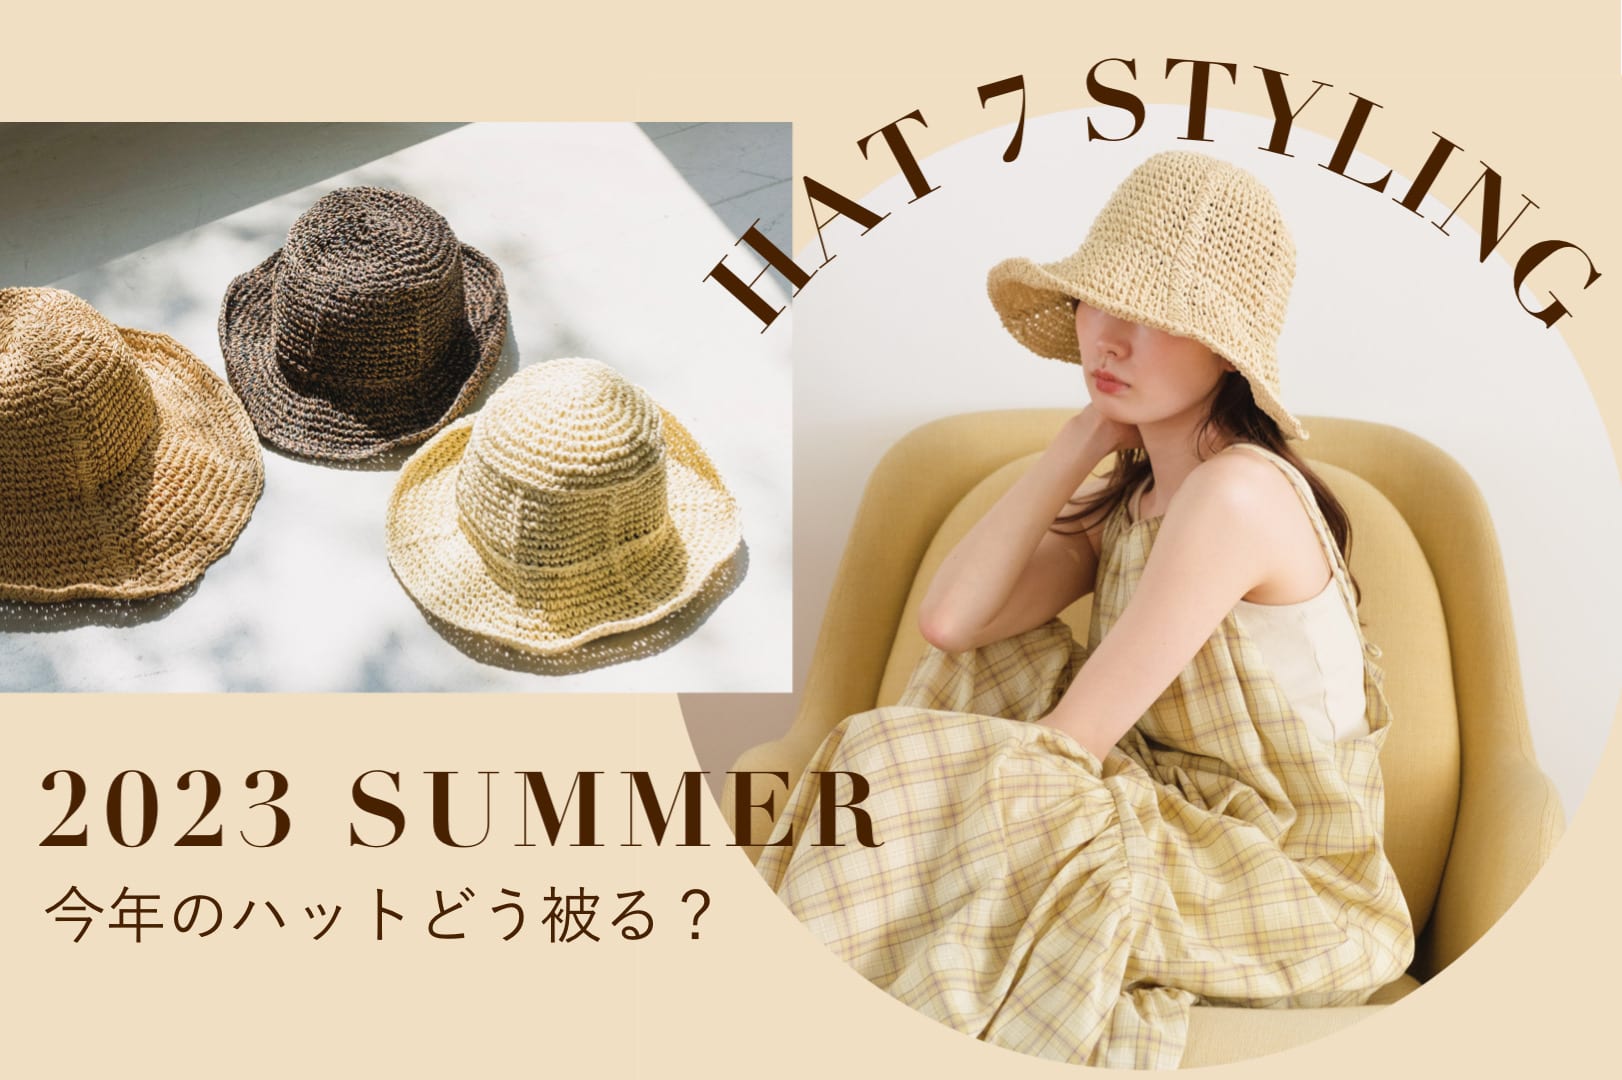 Kastane HAT 7stylings -どう被る？今年のハット-